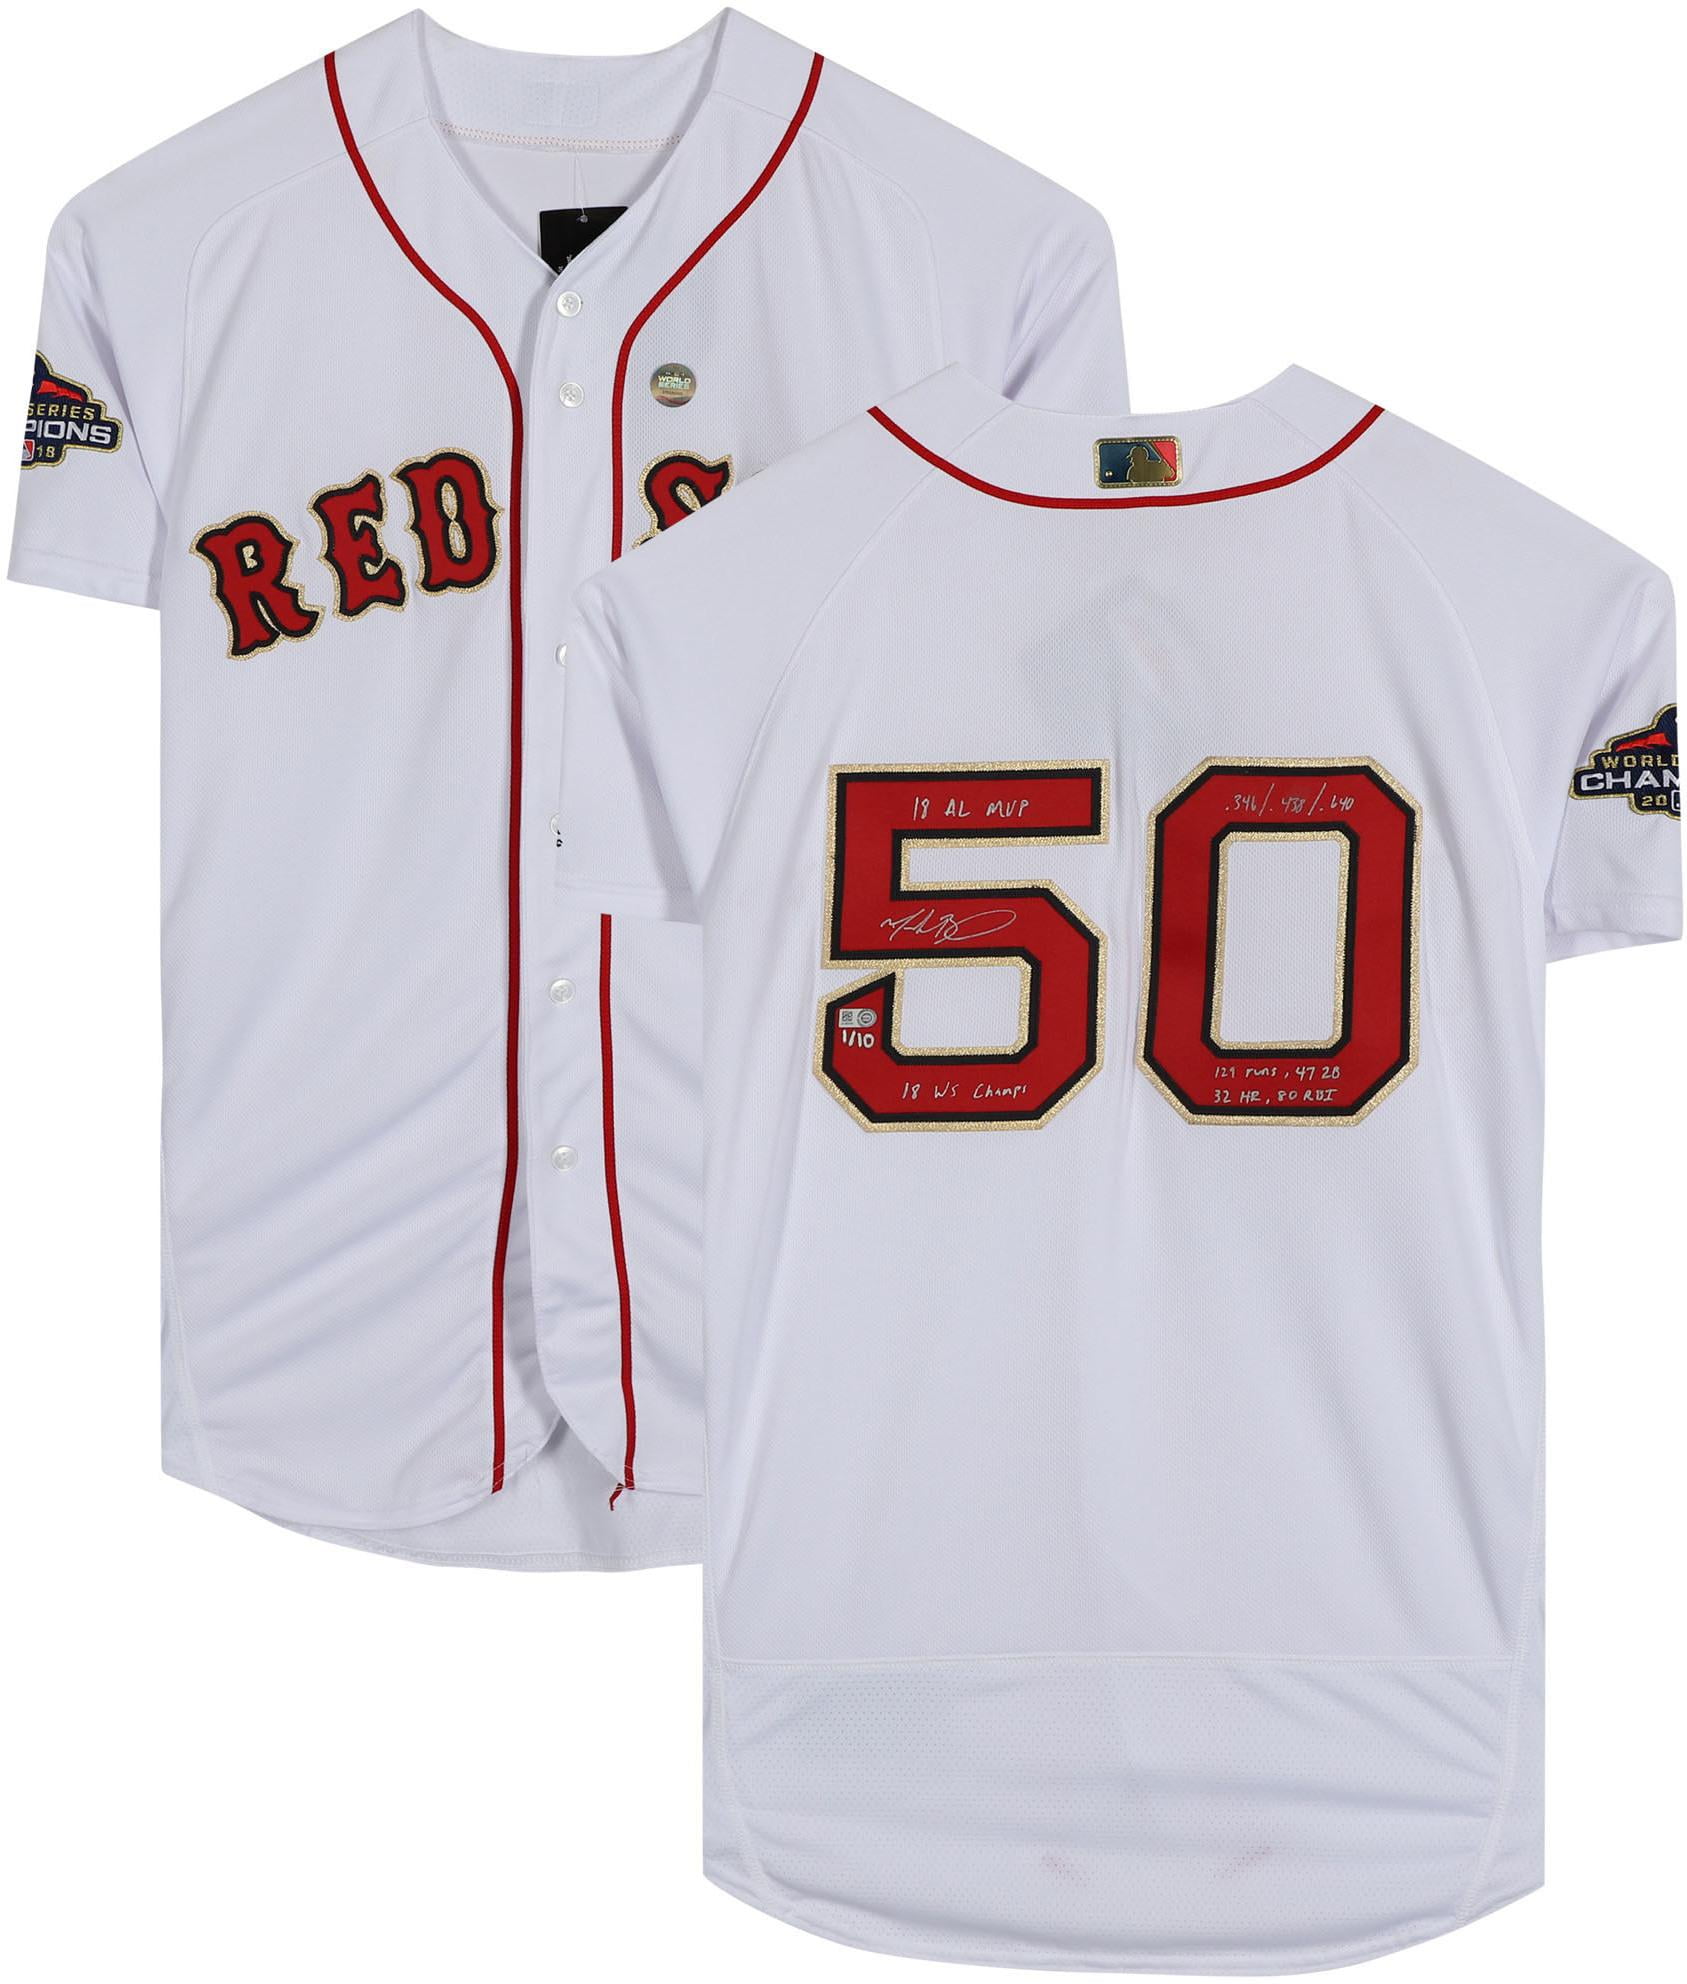 mookie betts authentic jersey